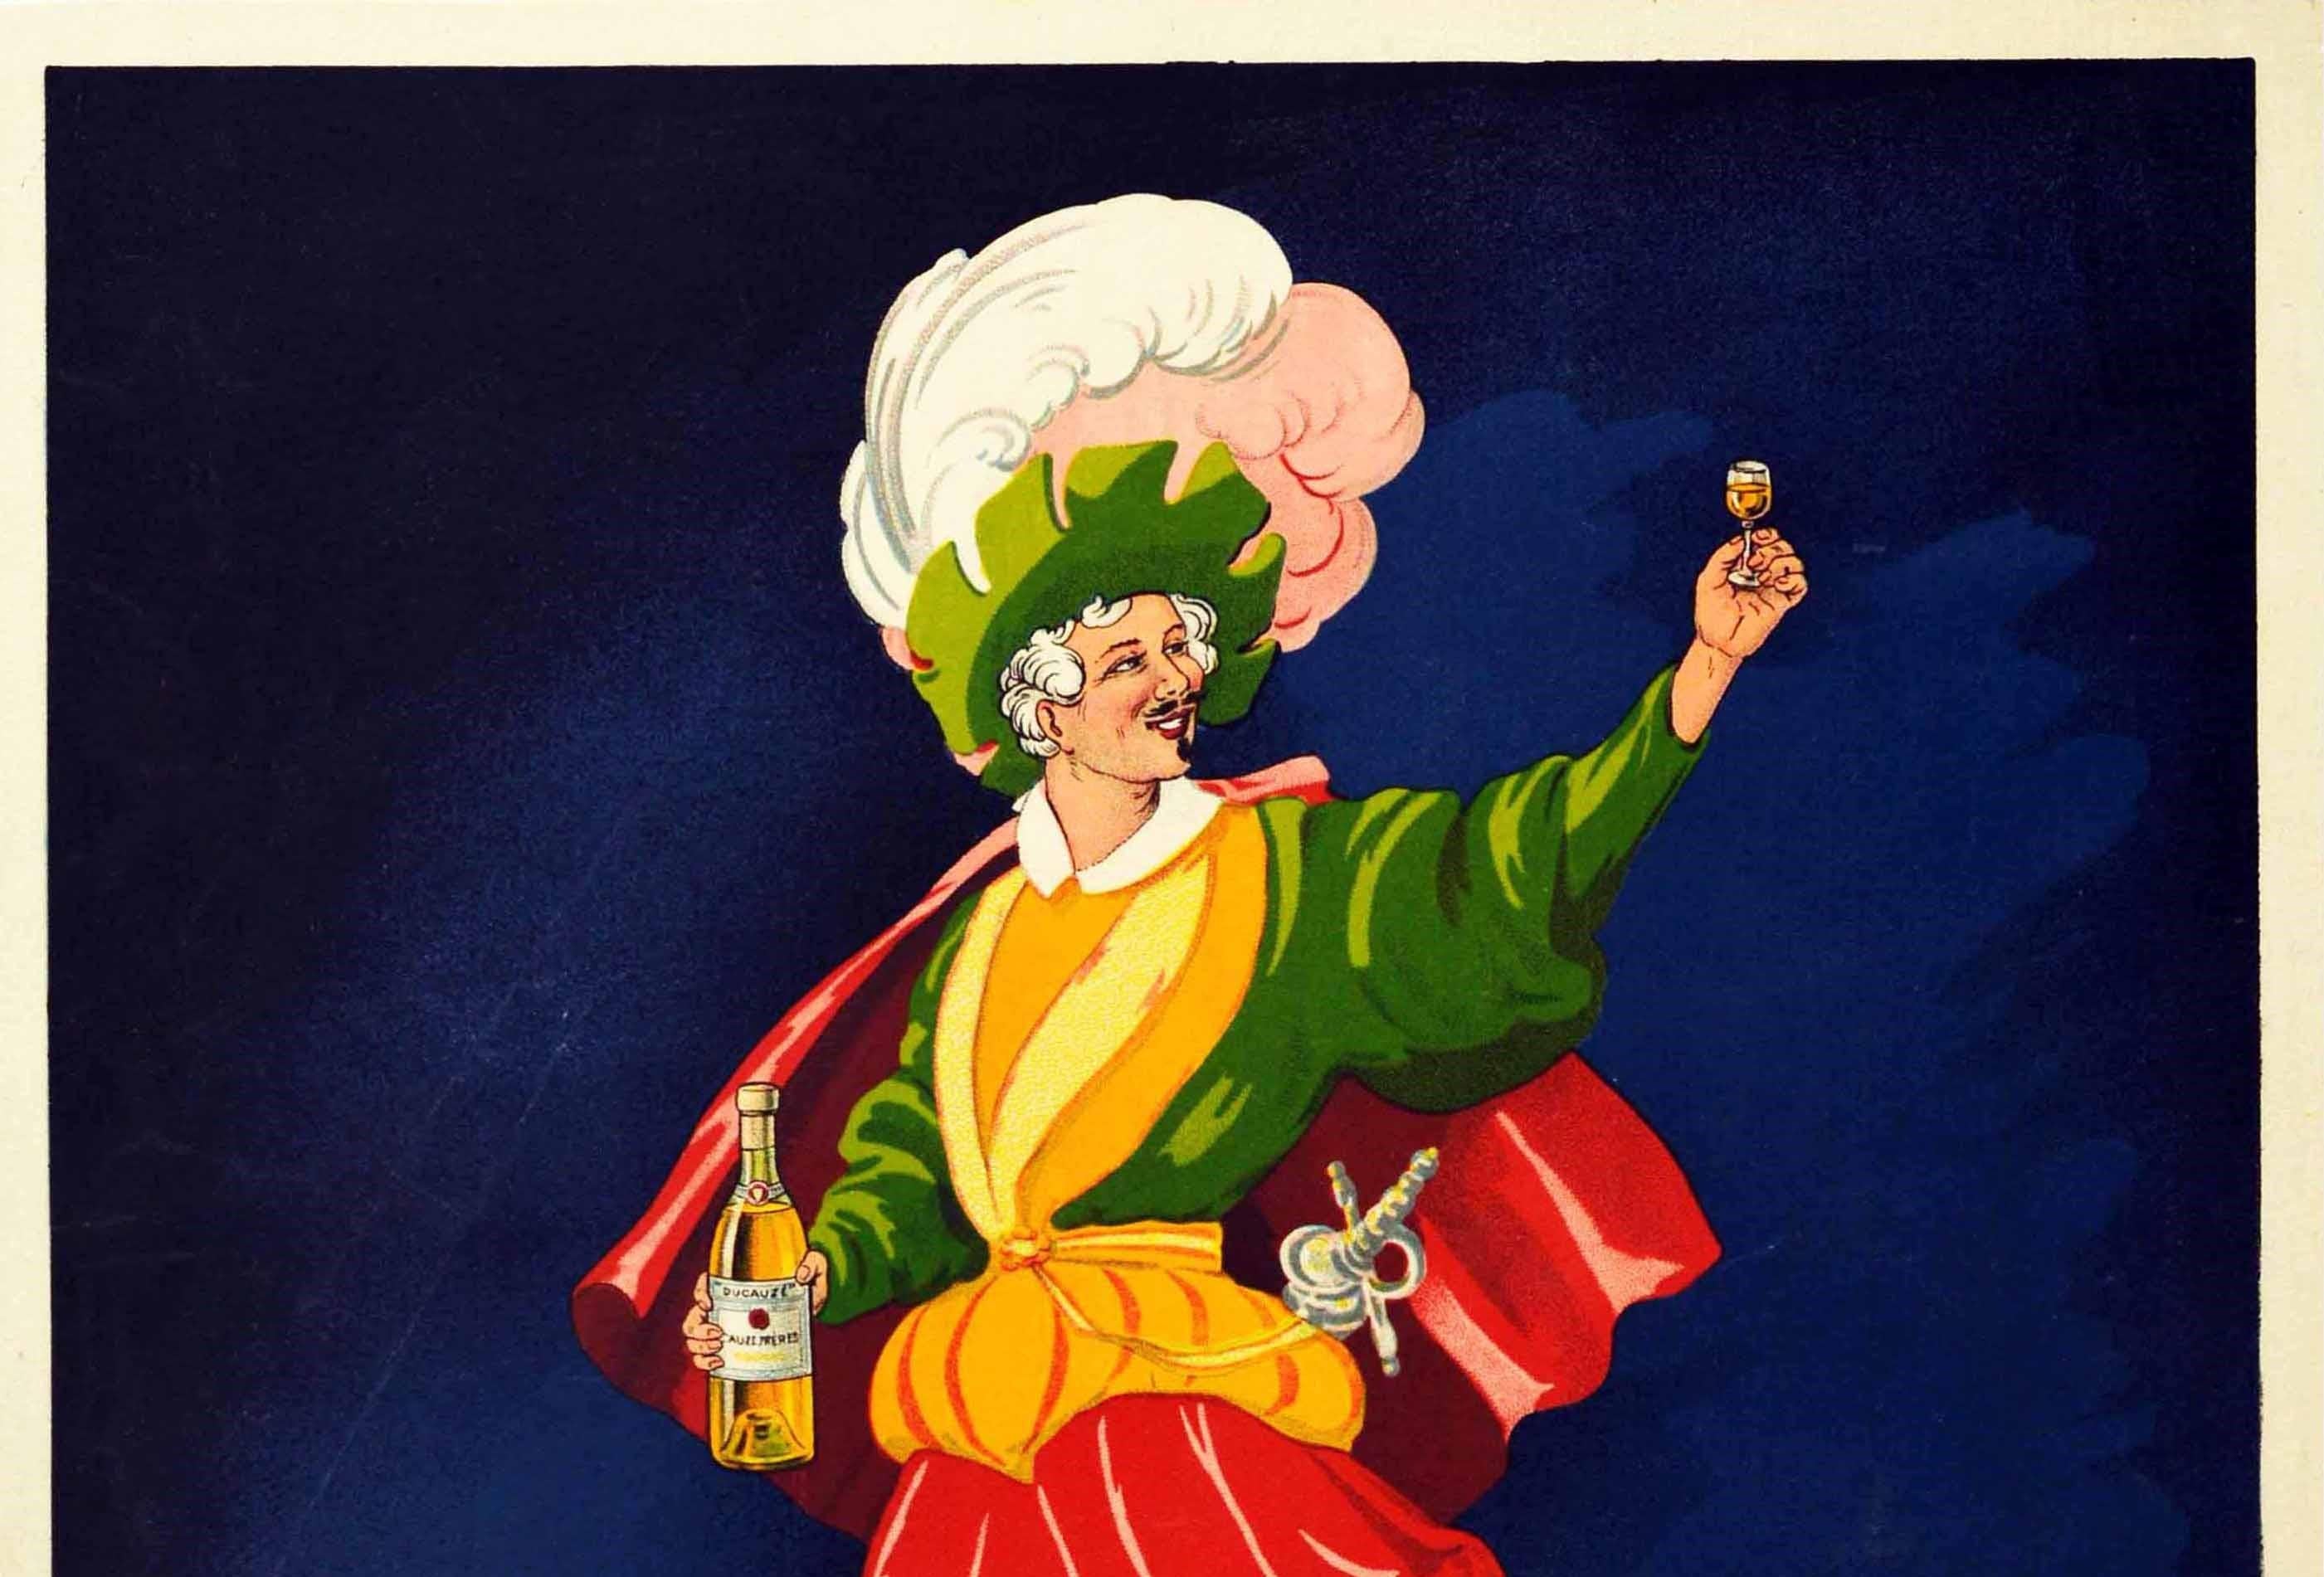 Original antique drink advertising poster for Cognac Ducauze Fama A Base De Calidad / Fame Based On Quality featuring a vibrant and fun design of a smiling man in pirate or musketeer style clothing in a green and yellow jacket with a red cape over